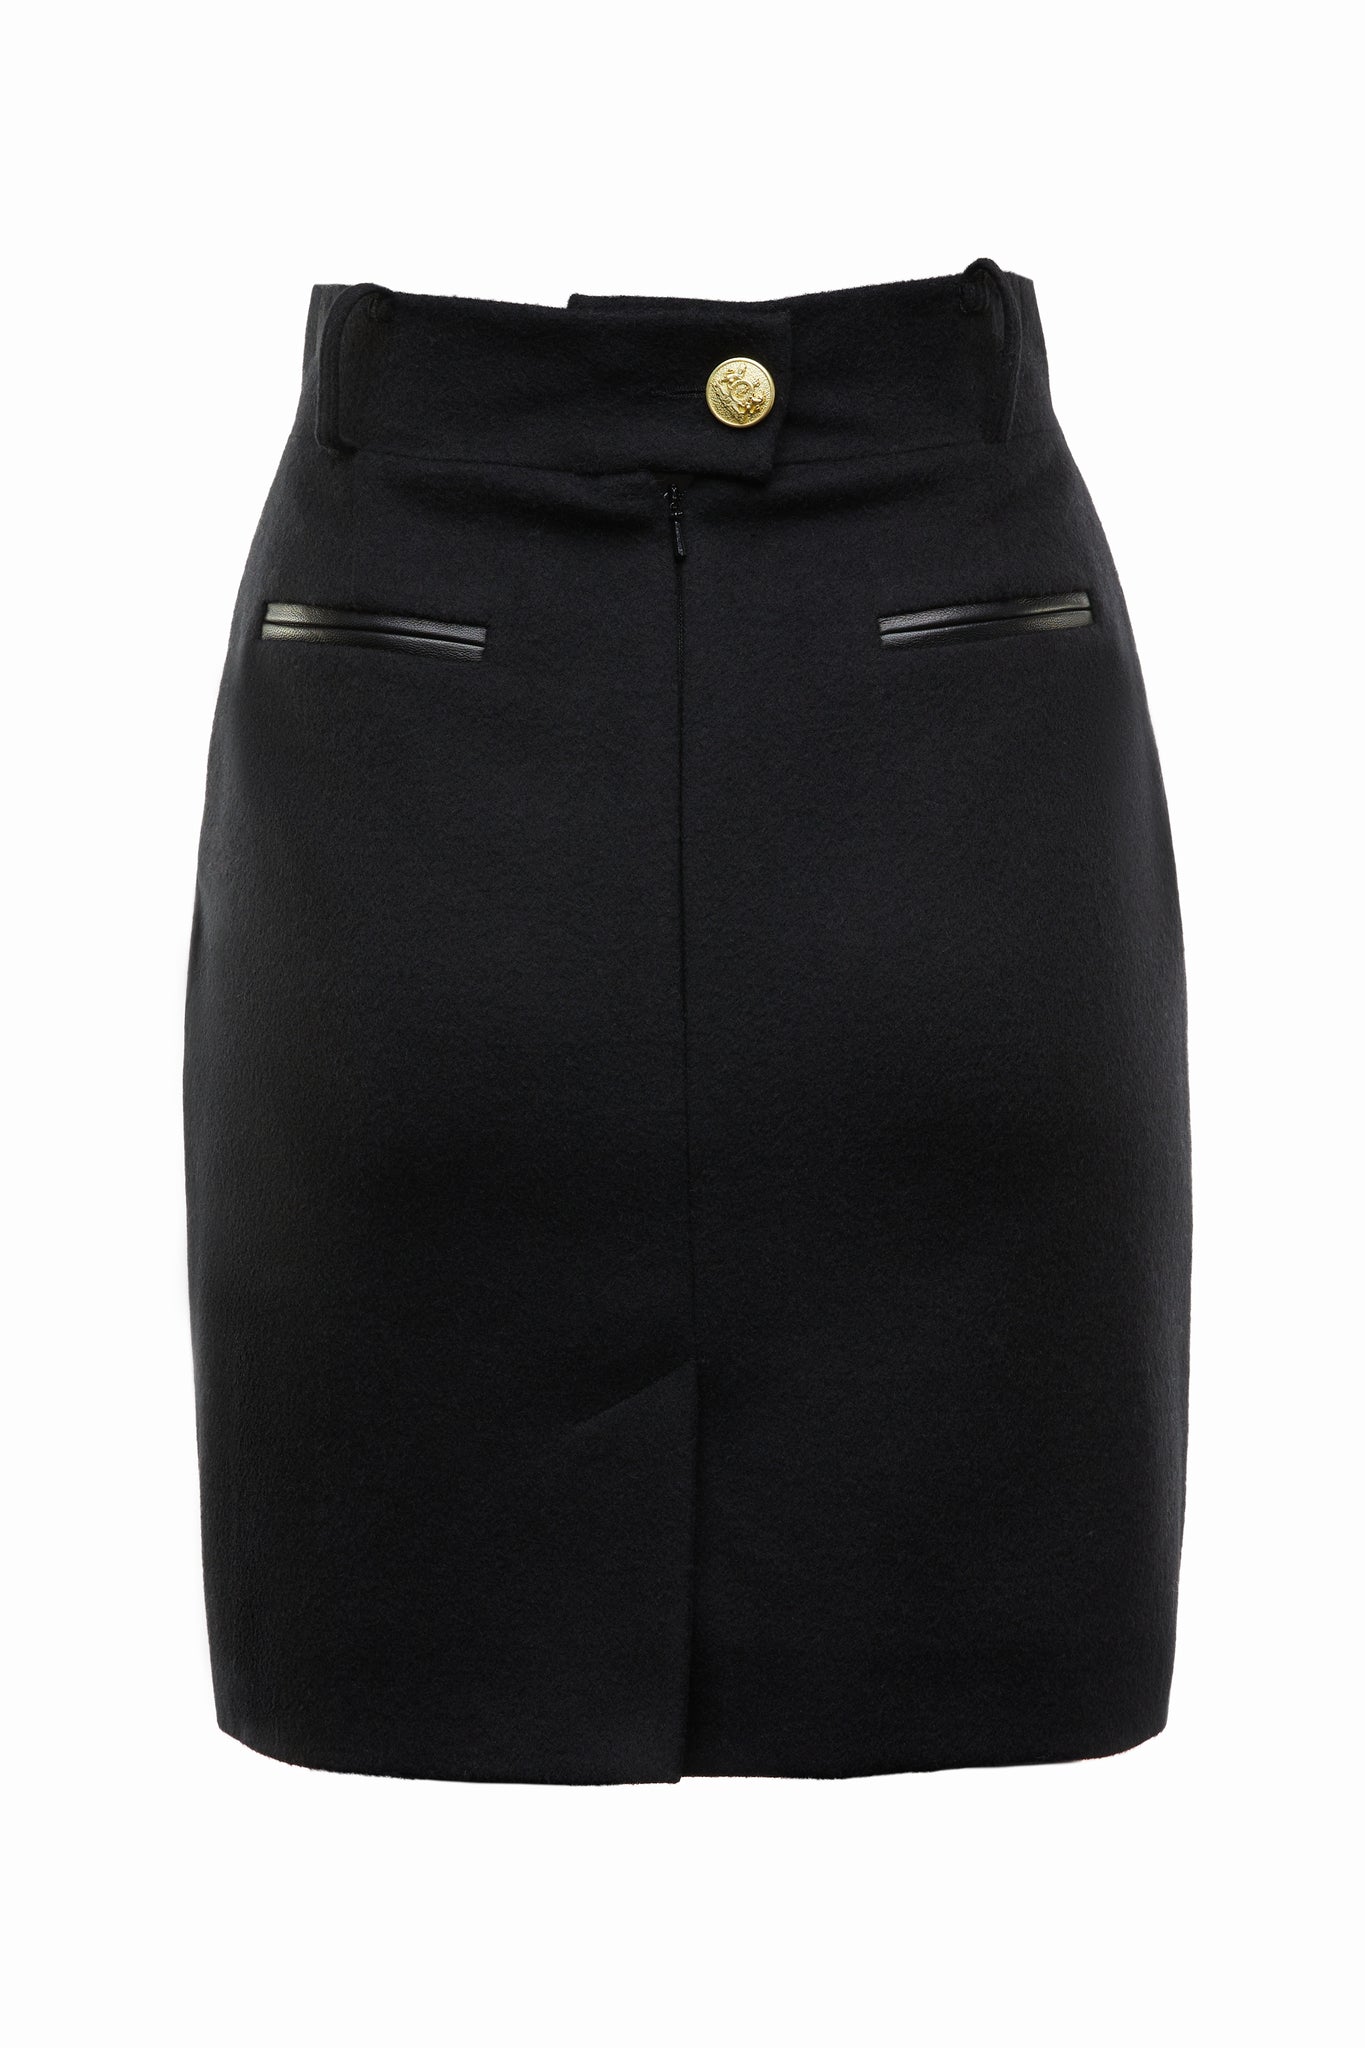 back of womens black wool pencil mini skirt with concealed zip fastening on centre back and gold rivets down front